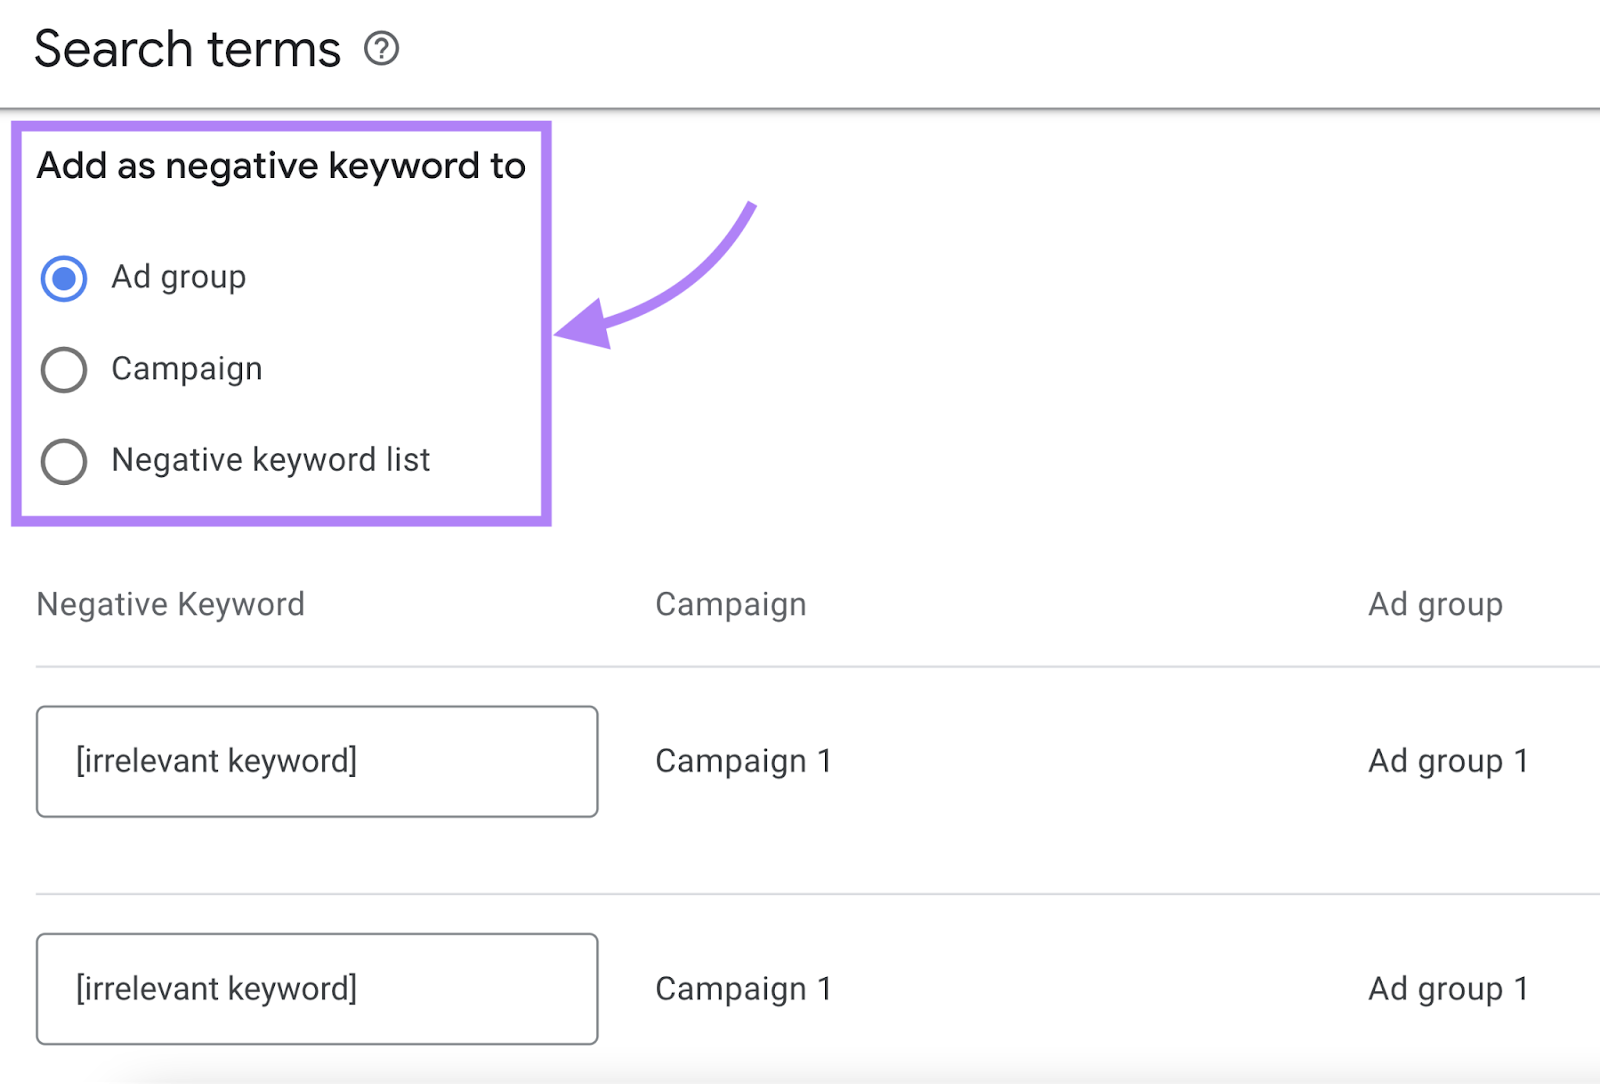 “Add as negative keyword to” section offers "Ad group, Campaign and Negative keyword list" options